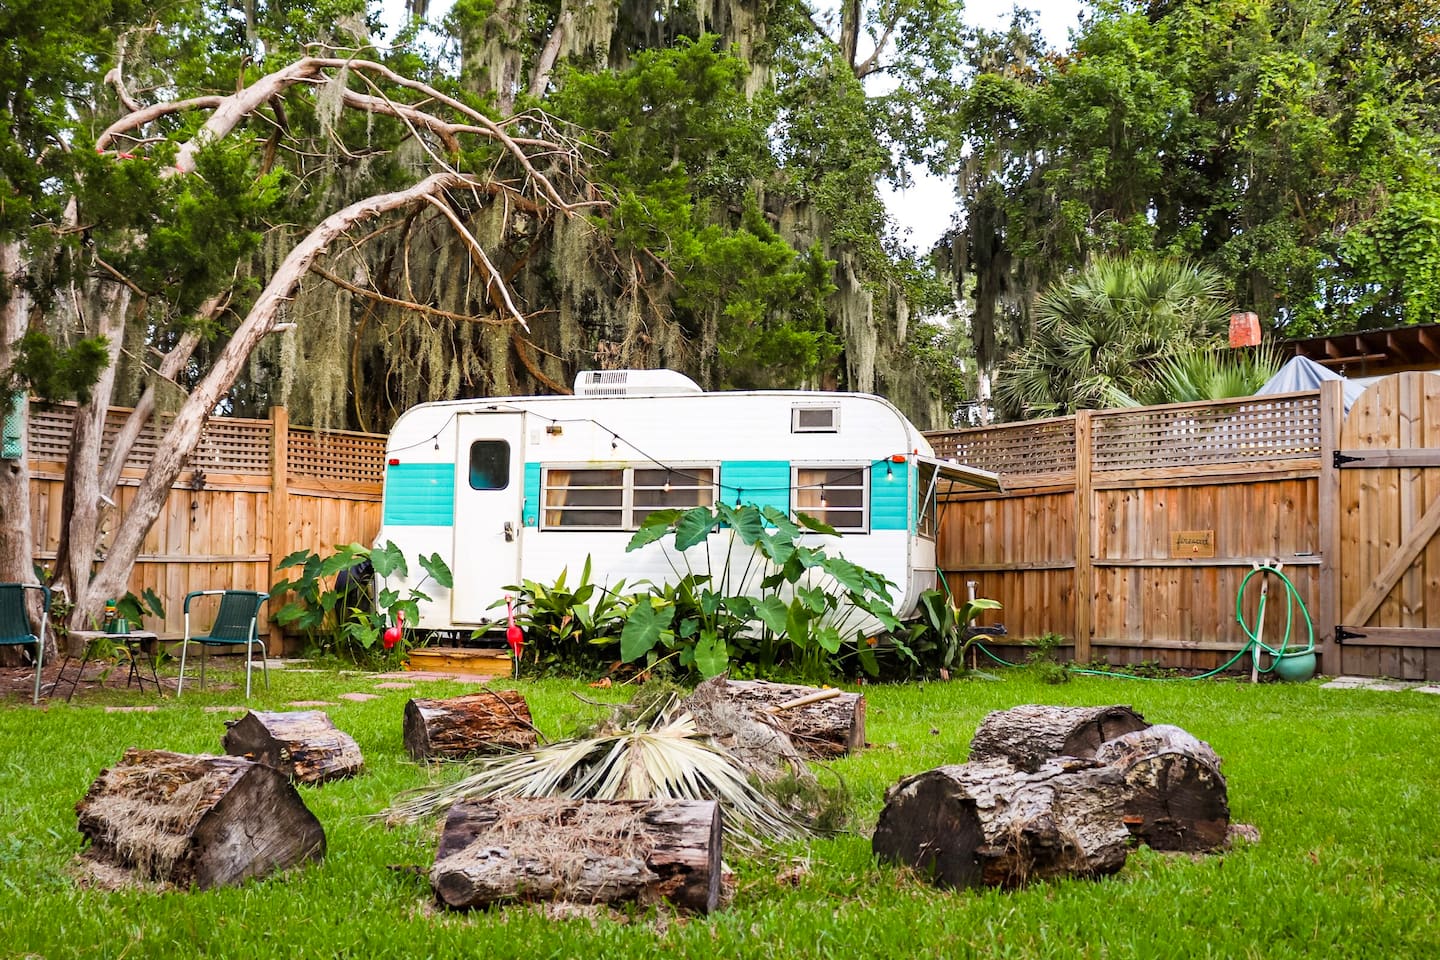 Glamping '60s Style at an Airbnb in Savannah